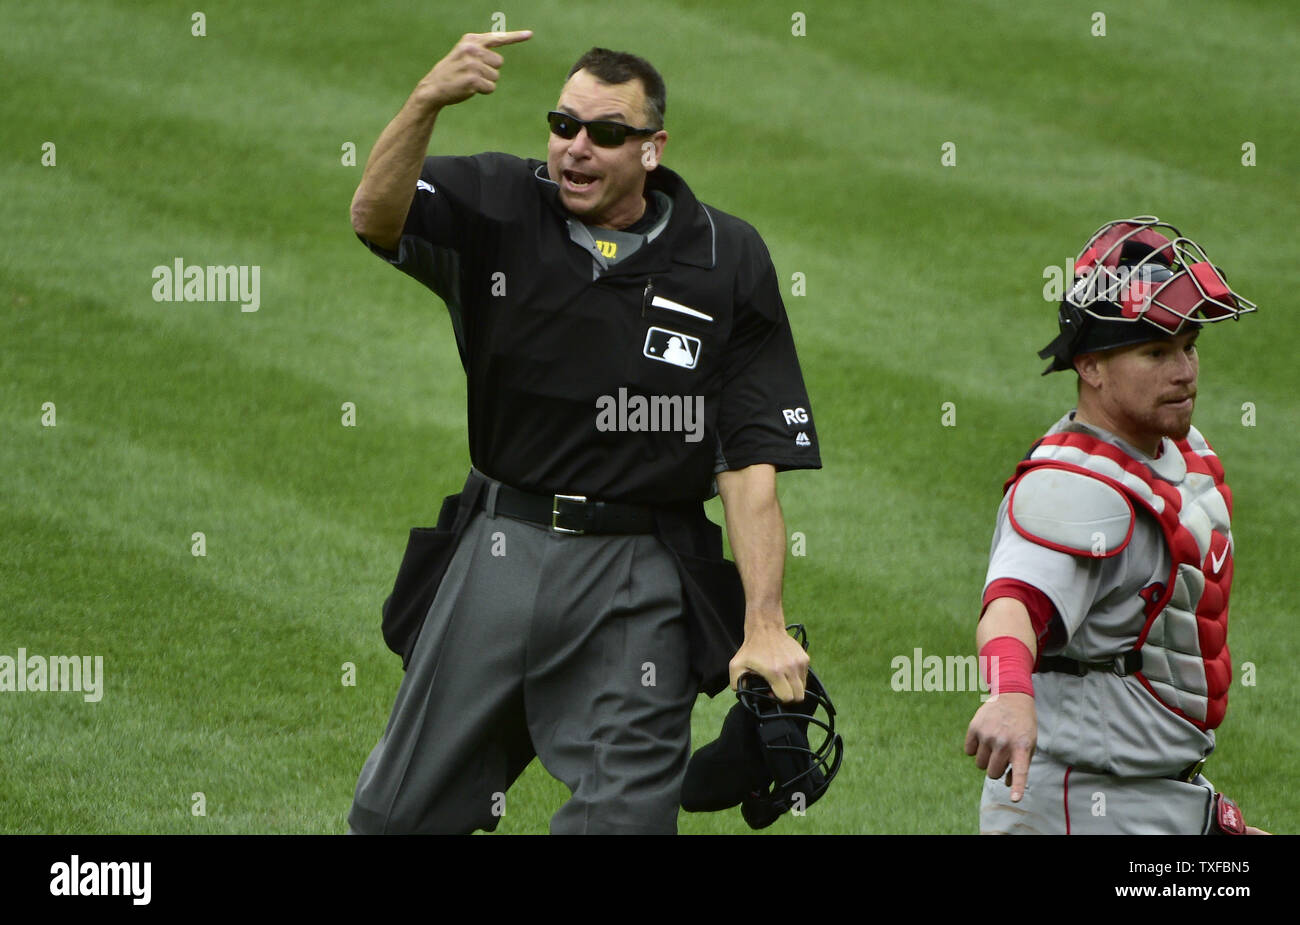 Home plate umpire Andy Fletcher signals the ejection of Boston Red Sox relief pitcher Matt Barnes after Baltimore Orioles' Manny Machado dodged a high pitch that hit his bat during the eighth inning at Camden Yards in Baltimore, April 23, 2017. Red Sox catcher Christian Vazquez (R) walks to the plate. Photo by David Tulis/UPI Stock Photo